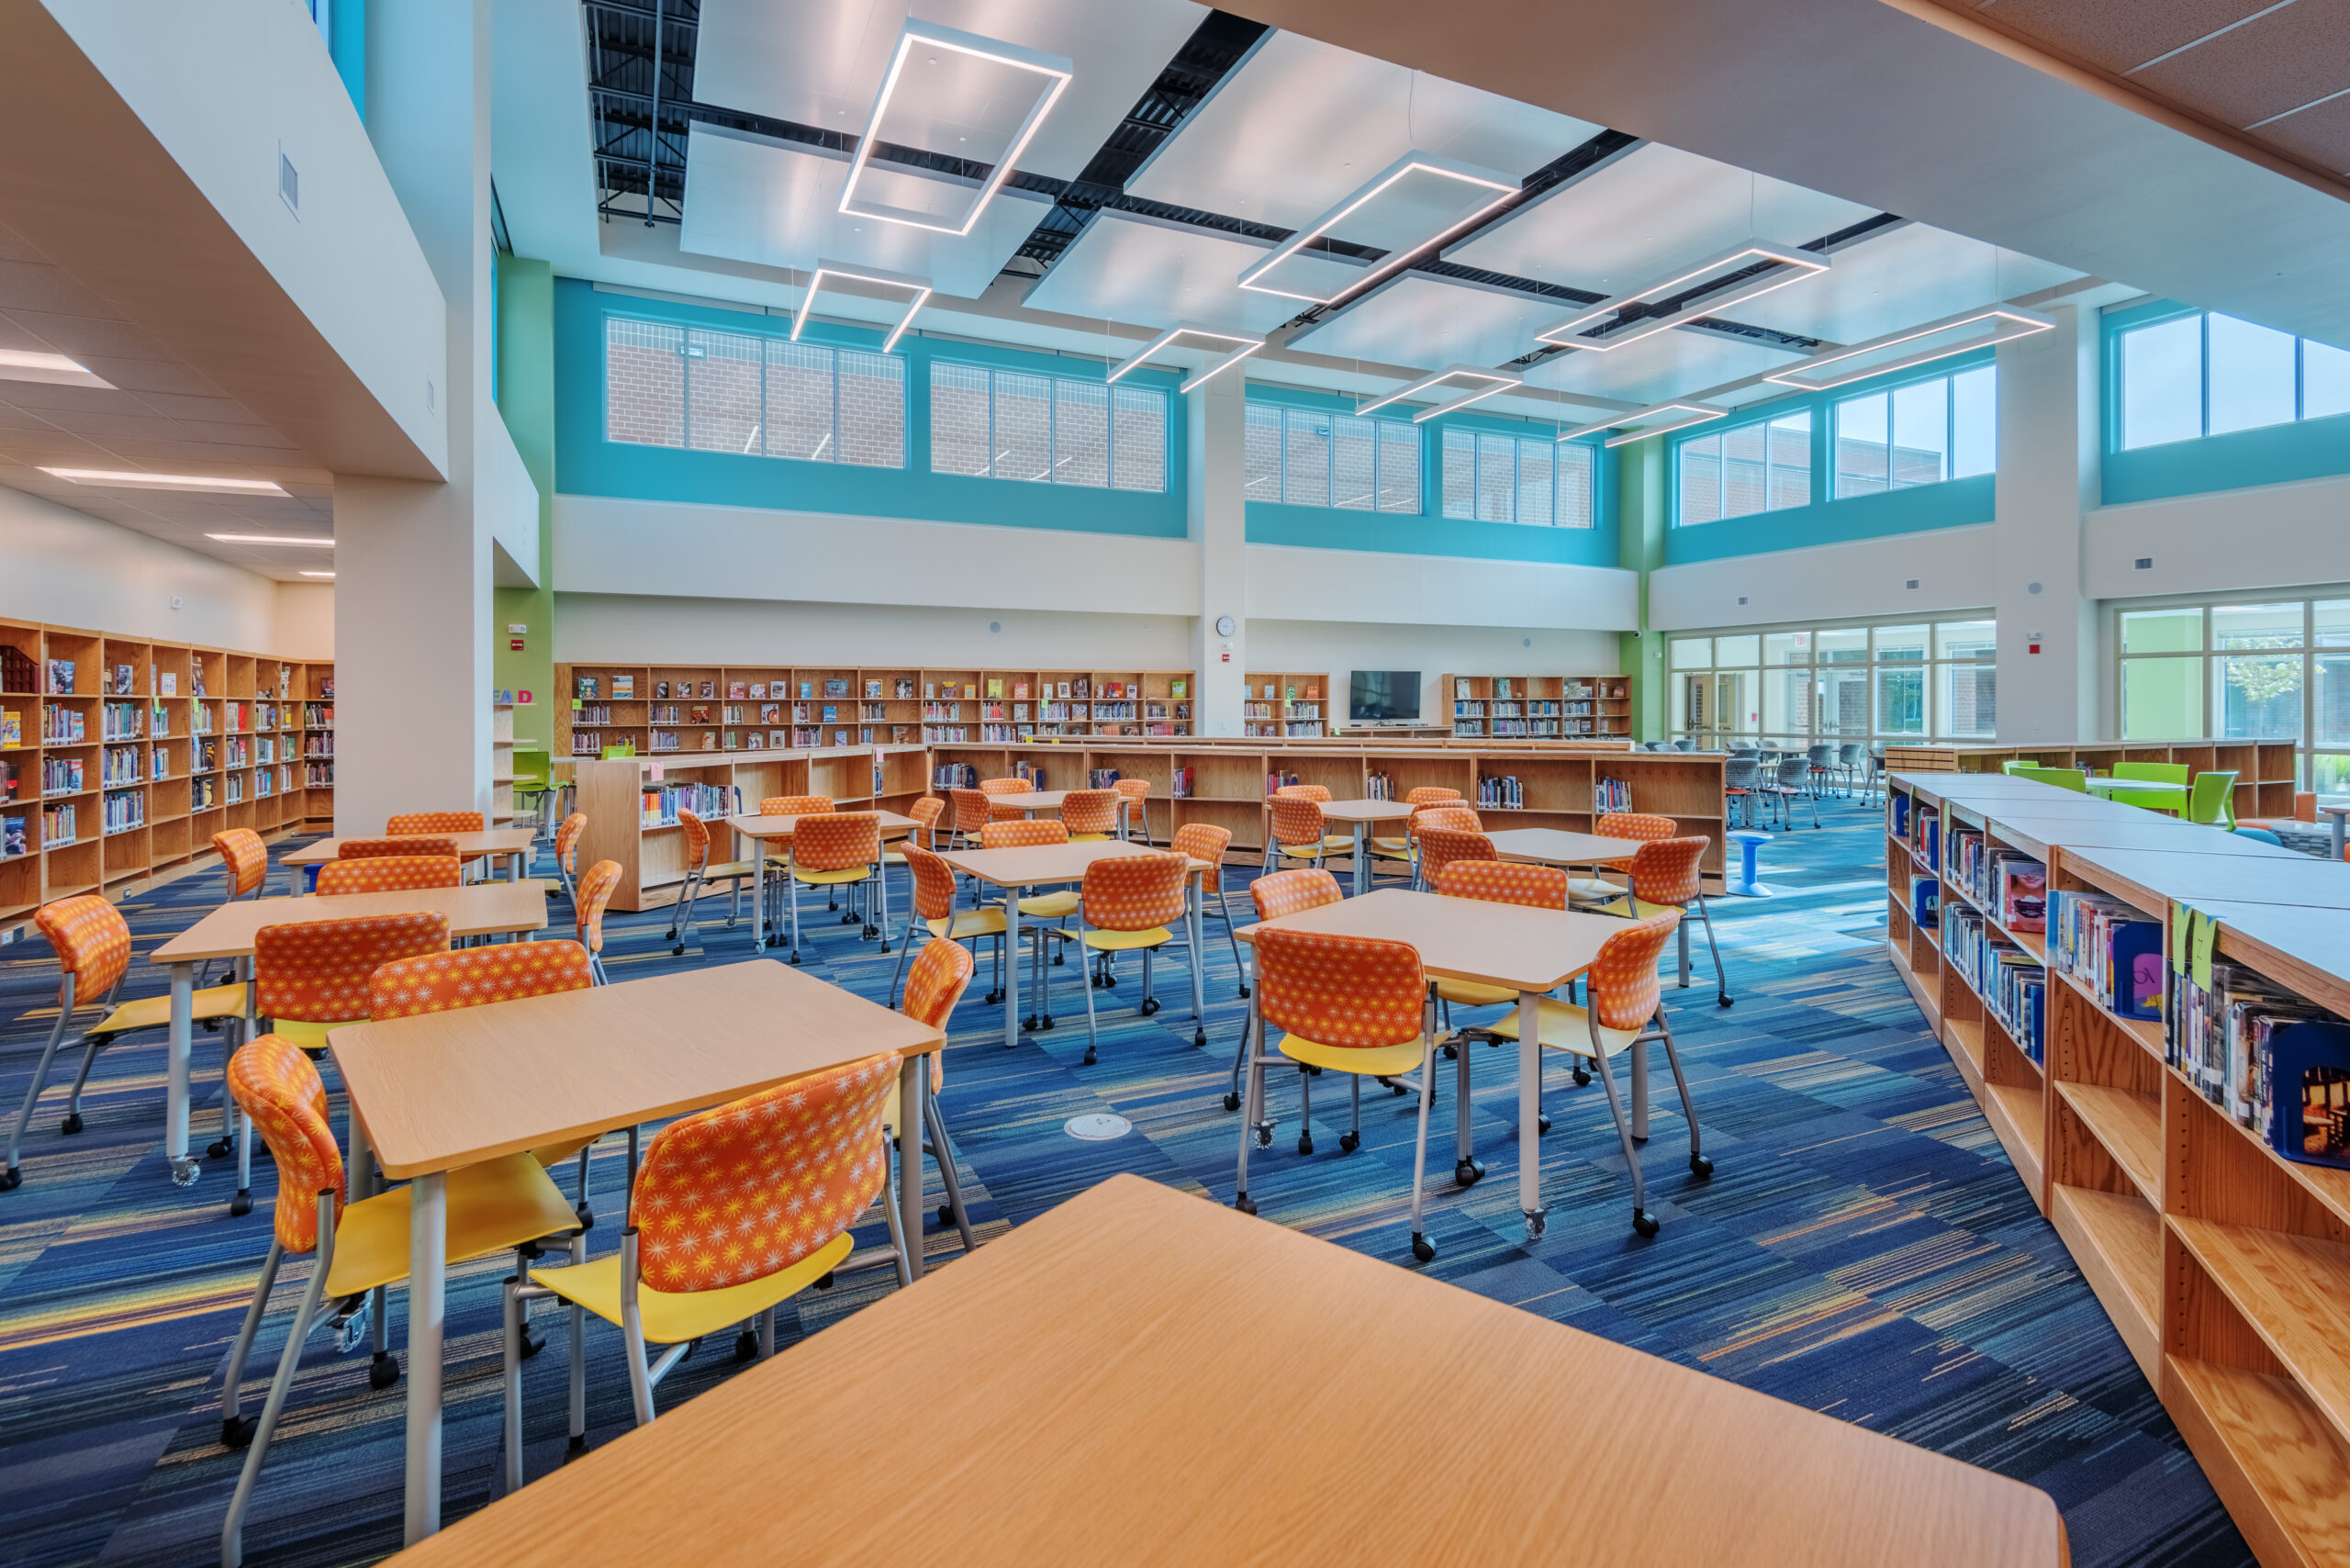 Neuse River Middle School Media Center with Bookshelves, Books, and Tables